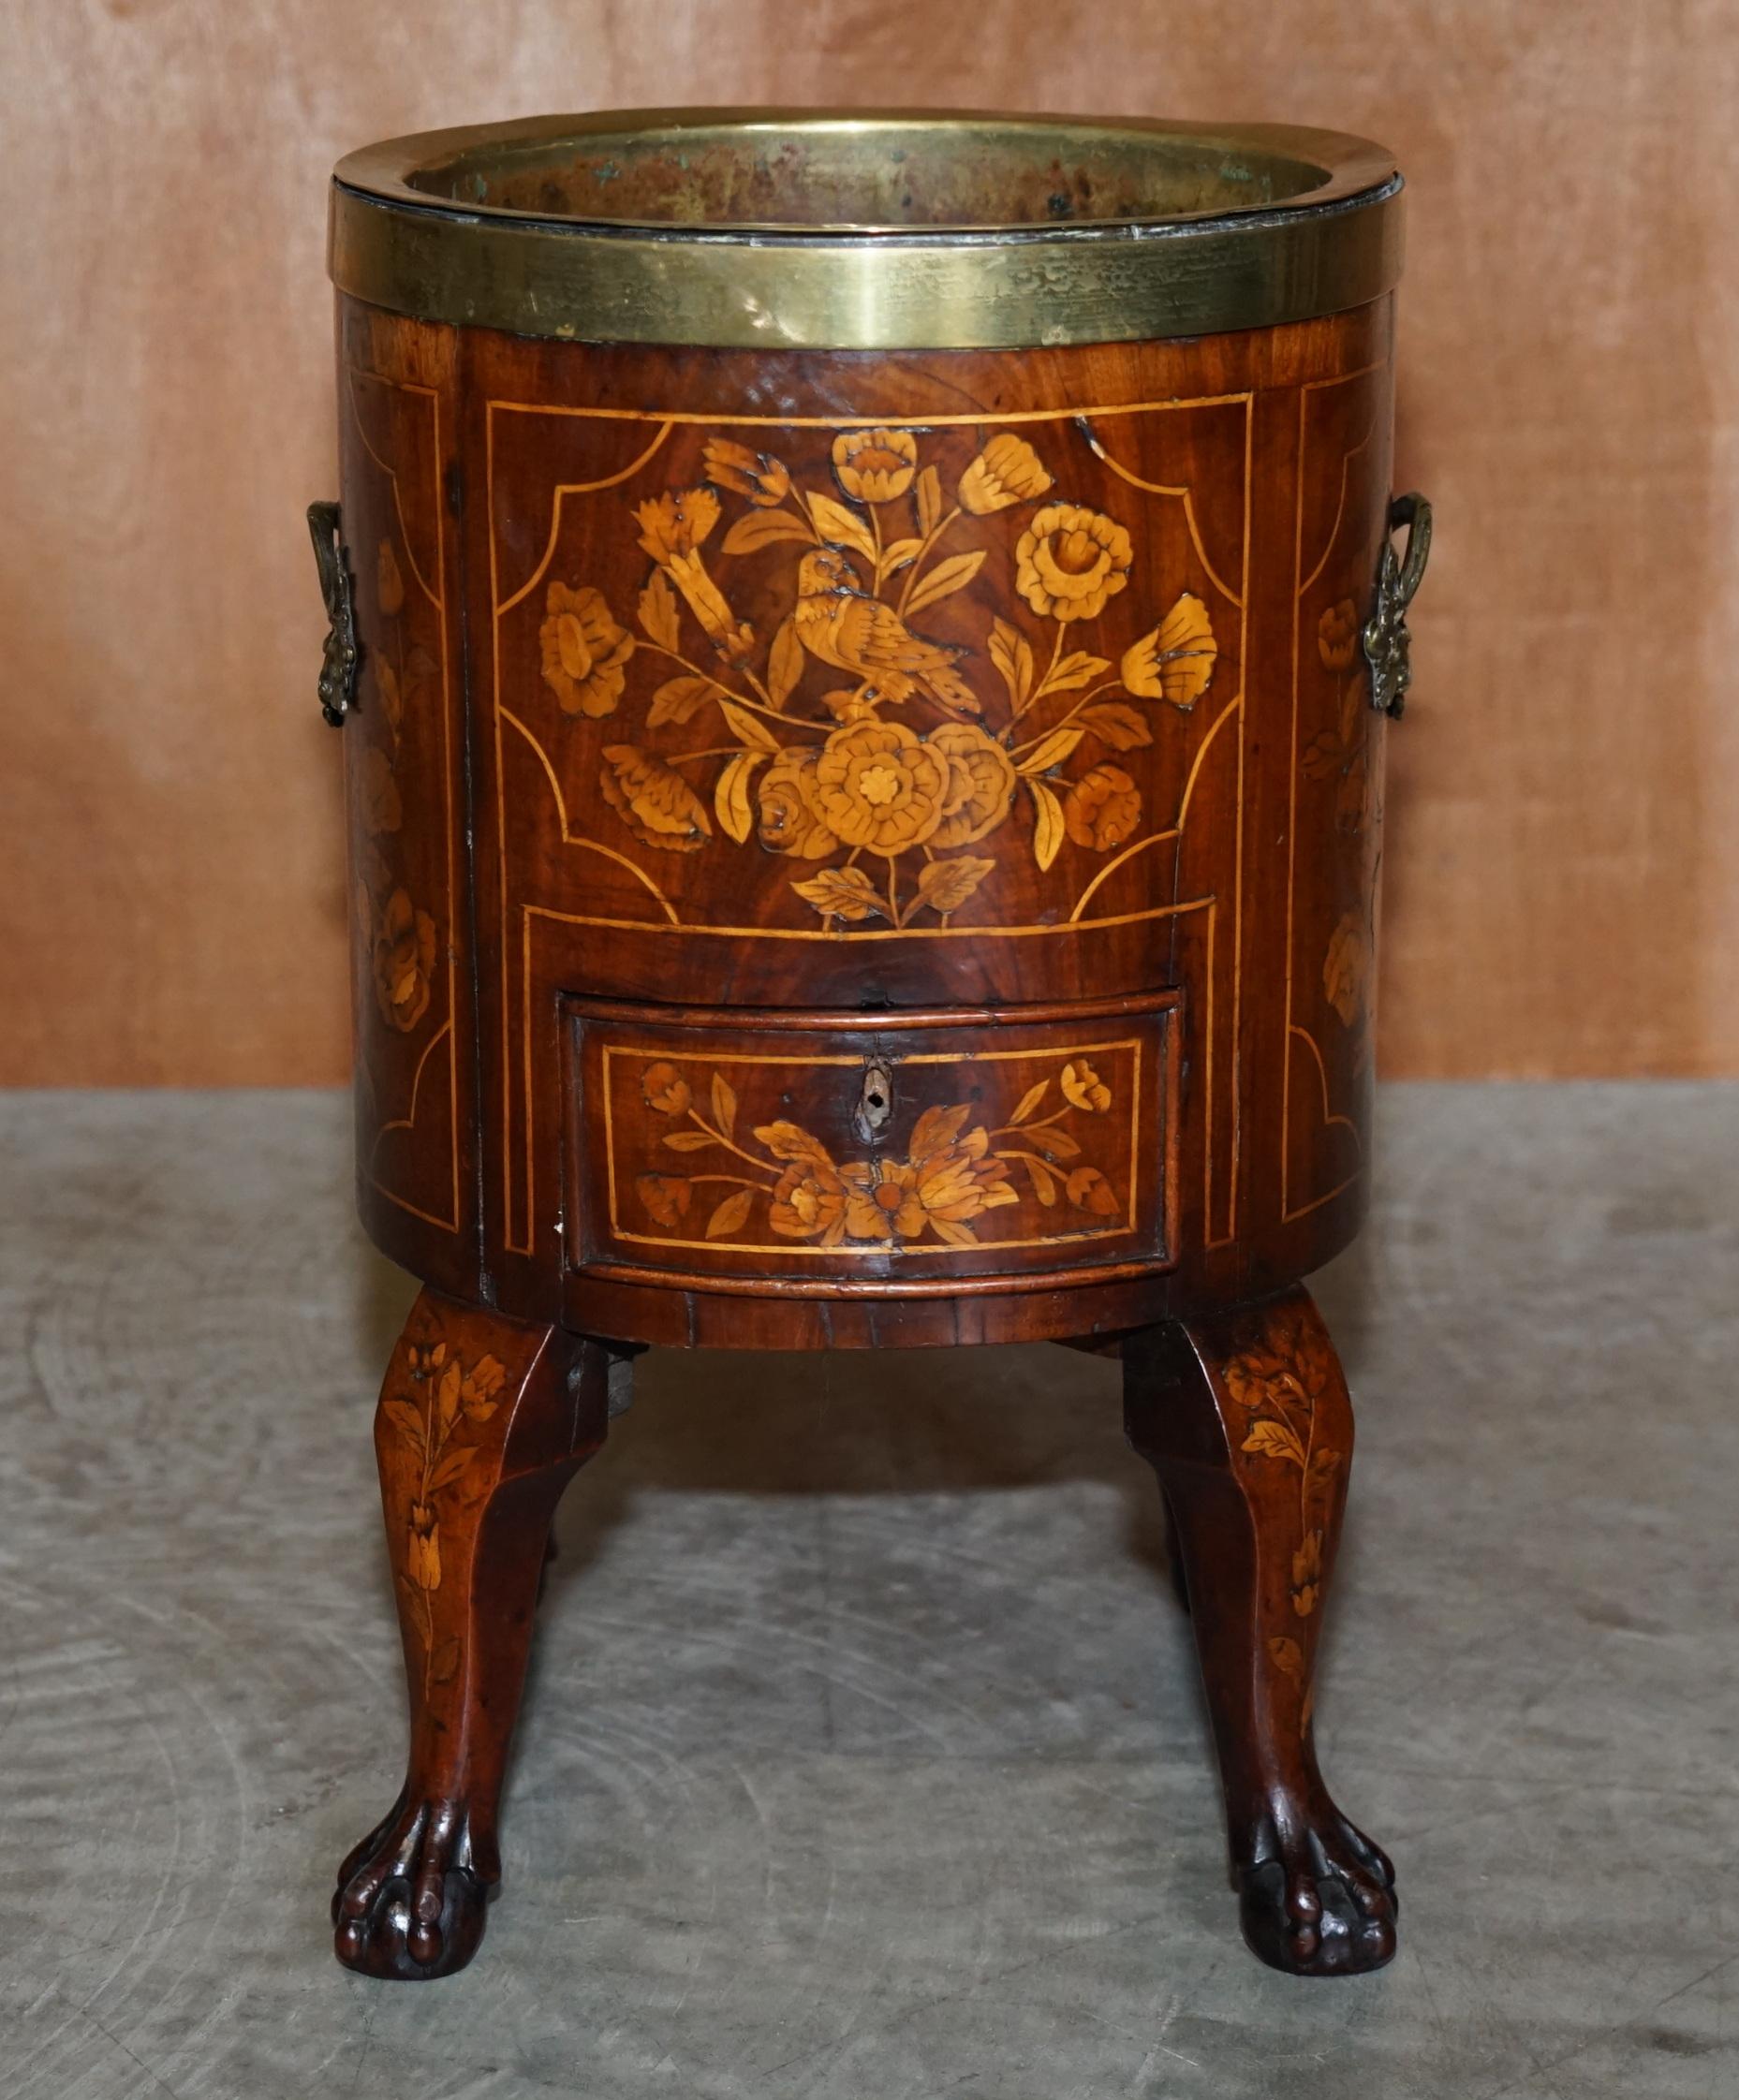 We are delighted to offer for sale this very rare circa 1800 Dutch inlaid wine cooler with original brass bucket and single drawer

A rare, collectable and good looking antique which fits well in any setting. This piece has exquisite marquetry